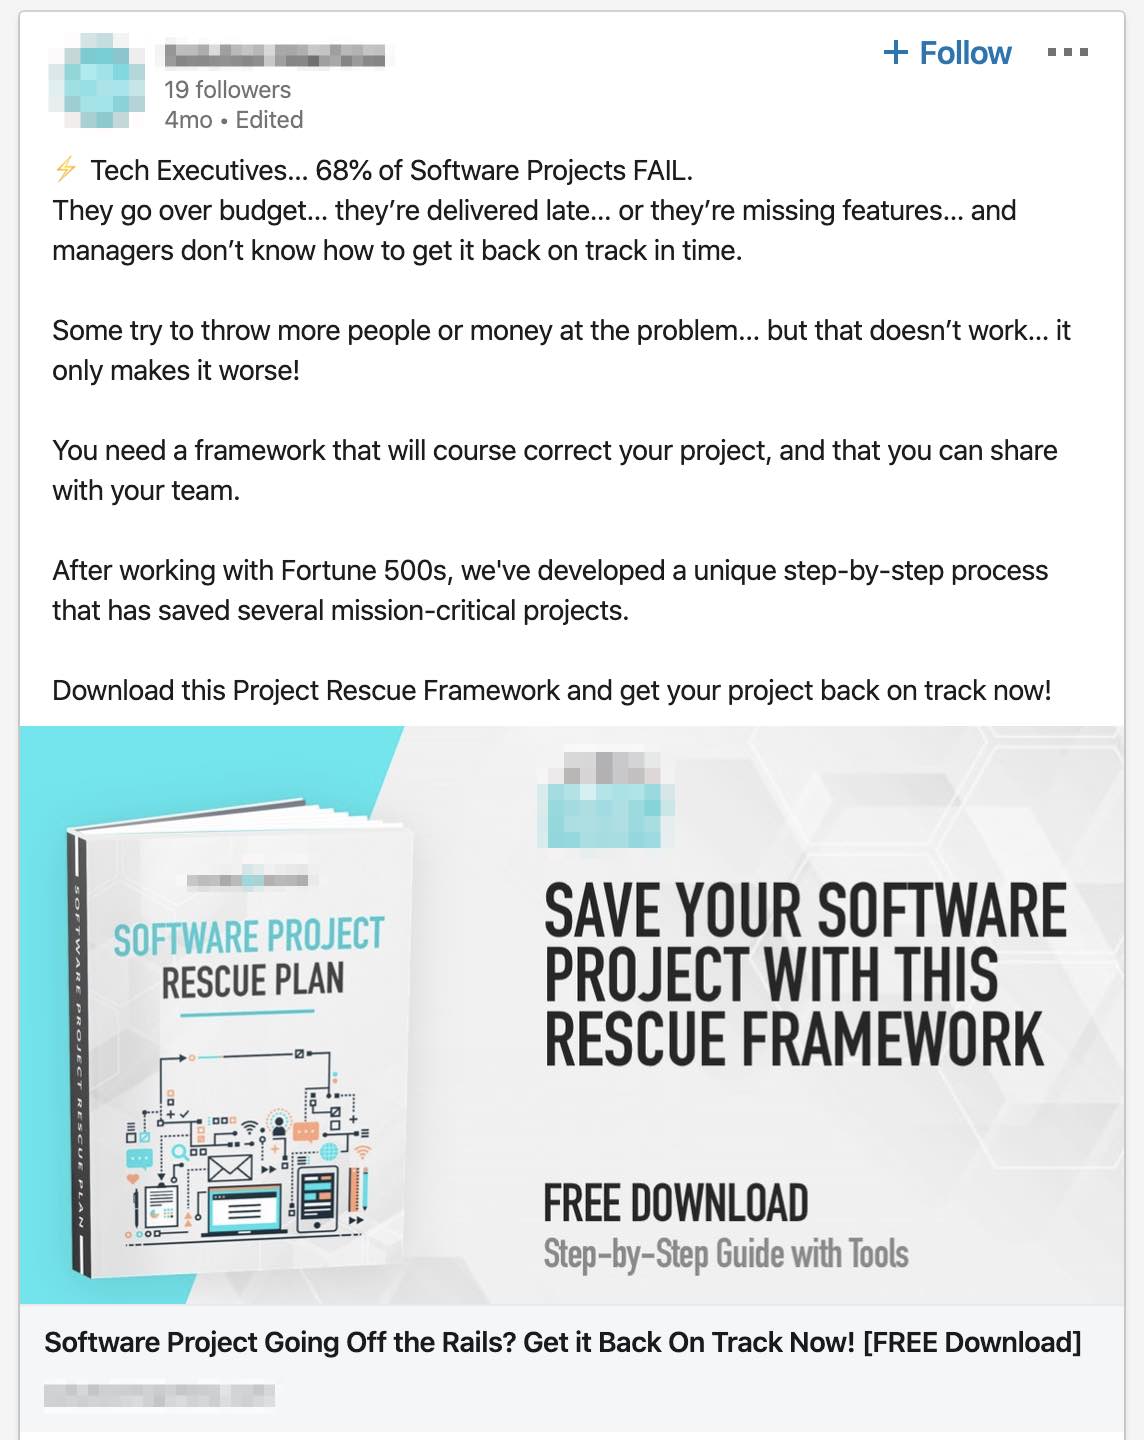 linkedin ad example - software